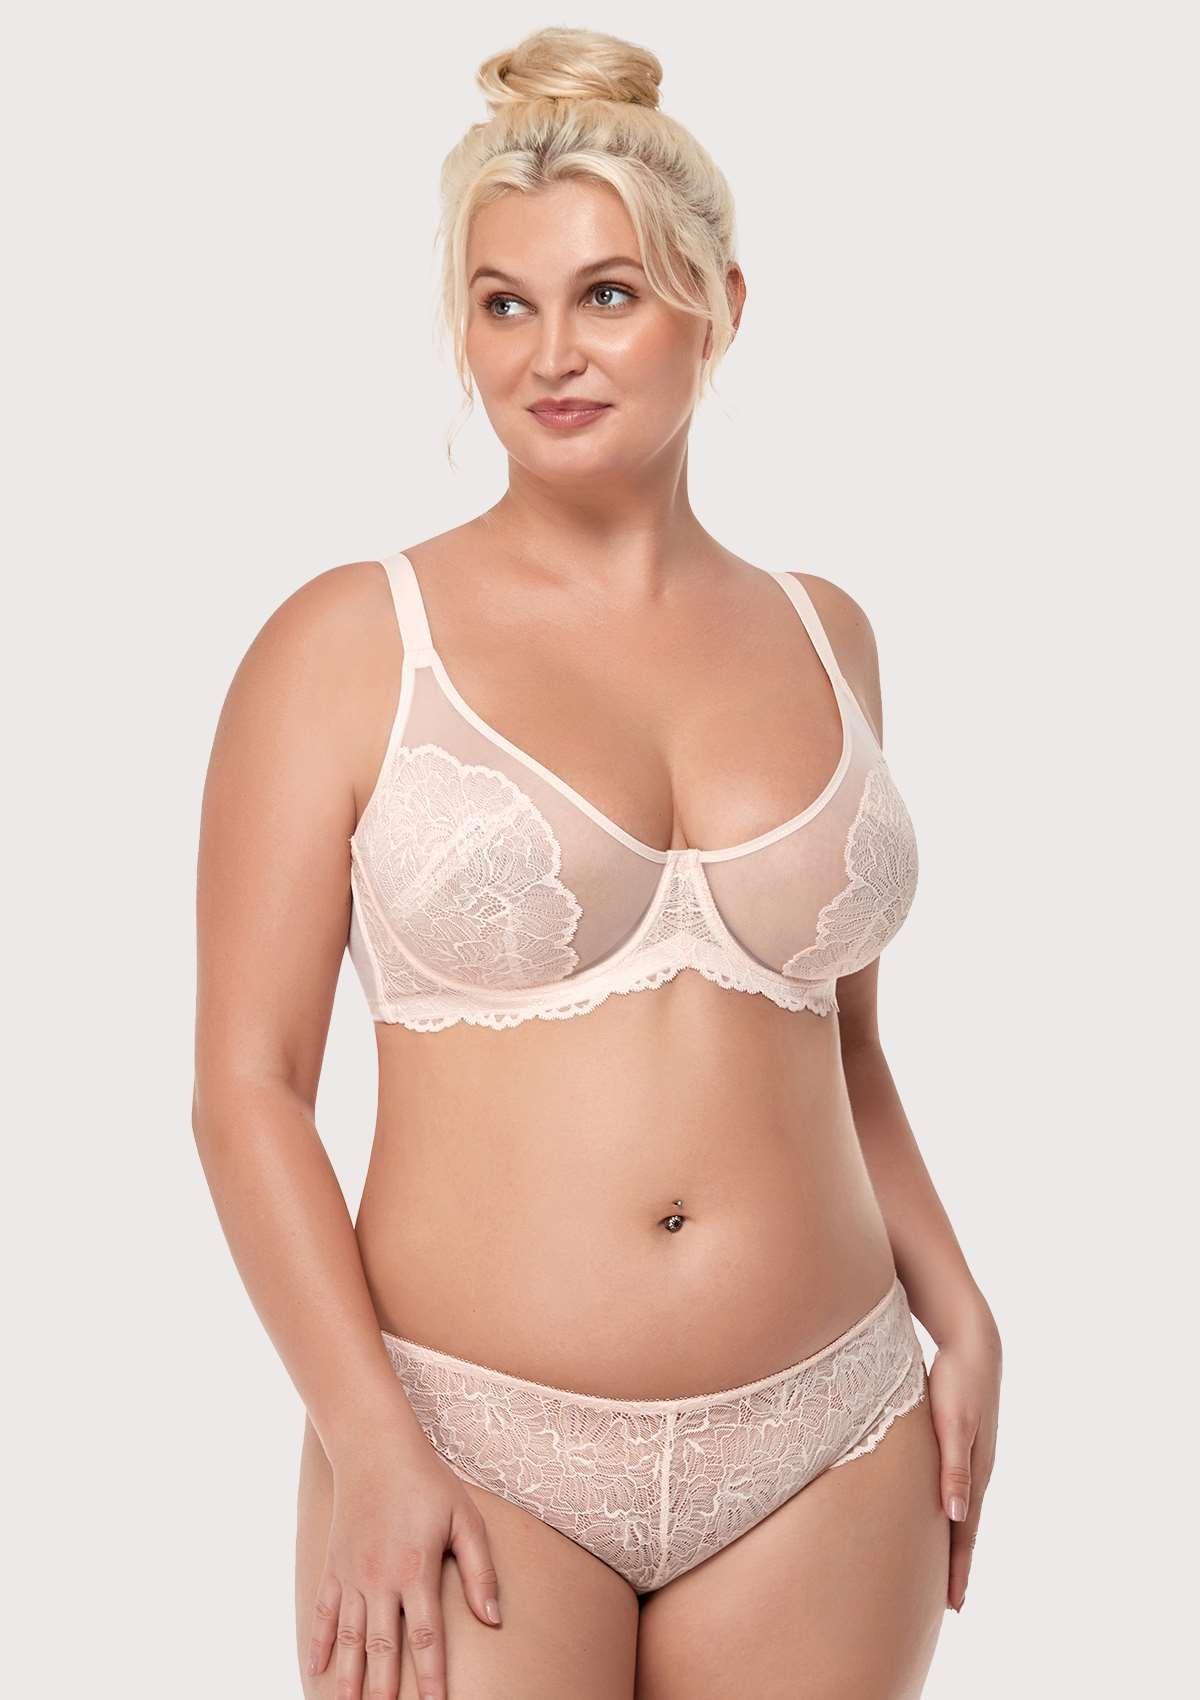 HSIA Blossom Matching Lacey Underwear And Bra Set: Sexy Lace Bra - Dusty Peach / 42 / D